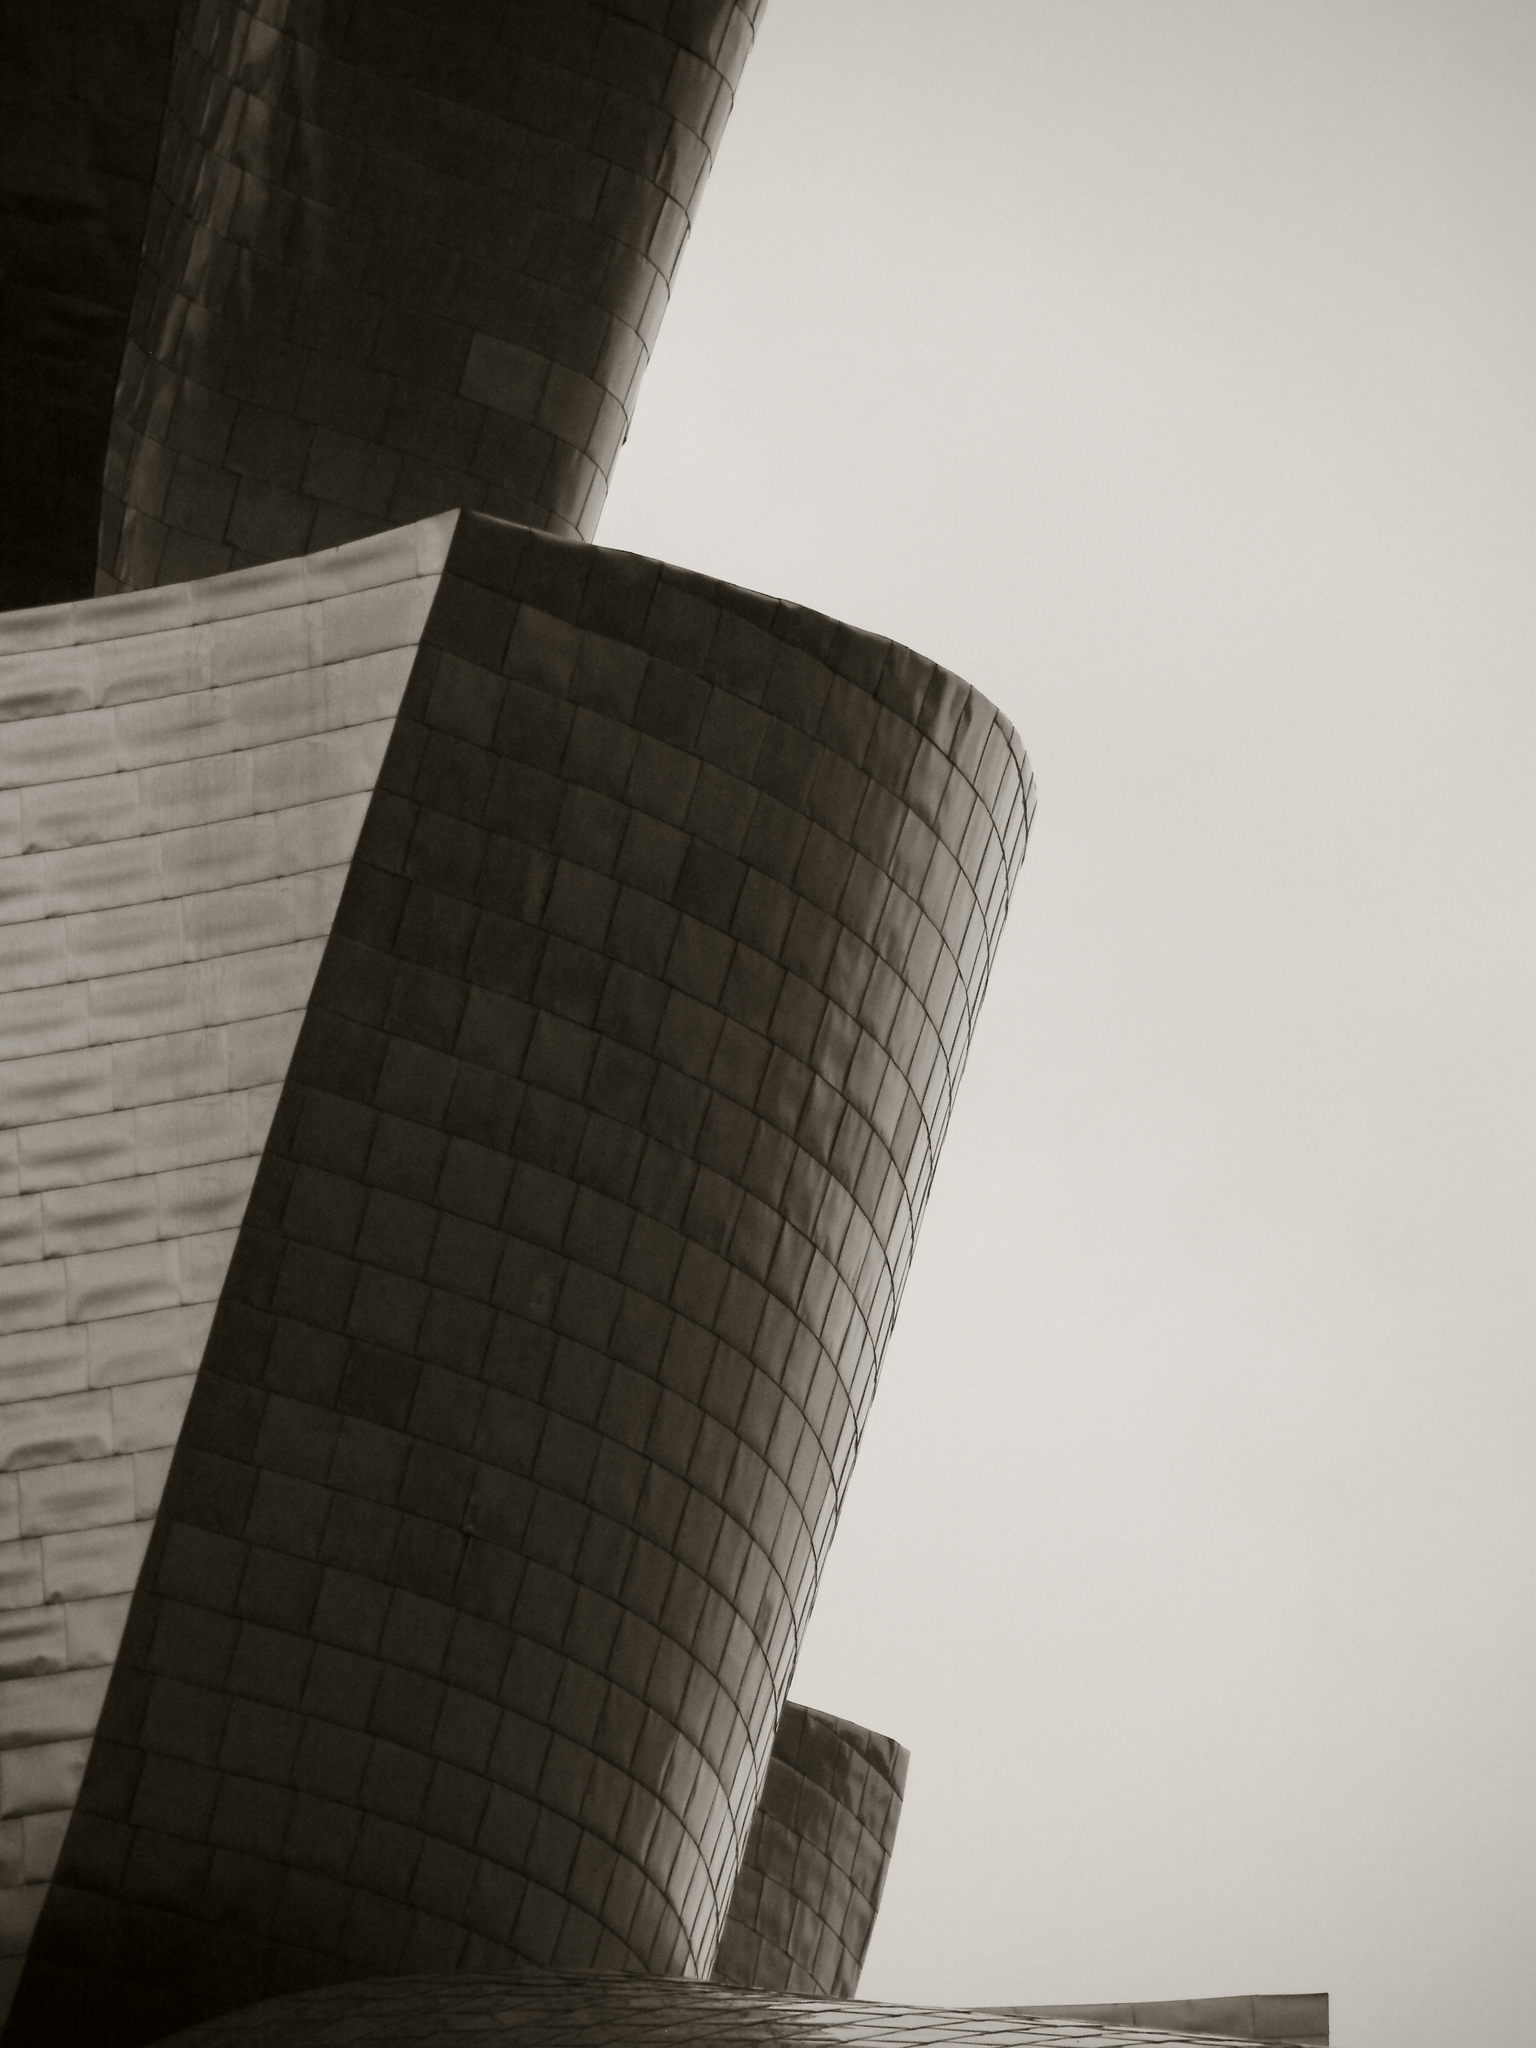 The Guggenheim Museum in Bilbao, Spain. Photo by Miguel A. Blanco on Flickr. 